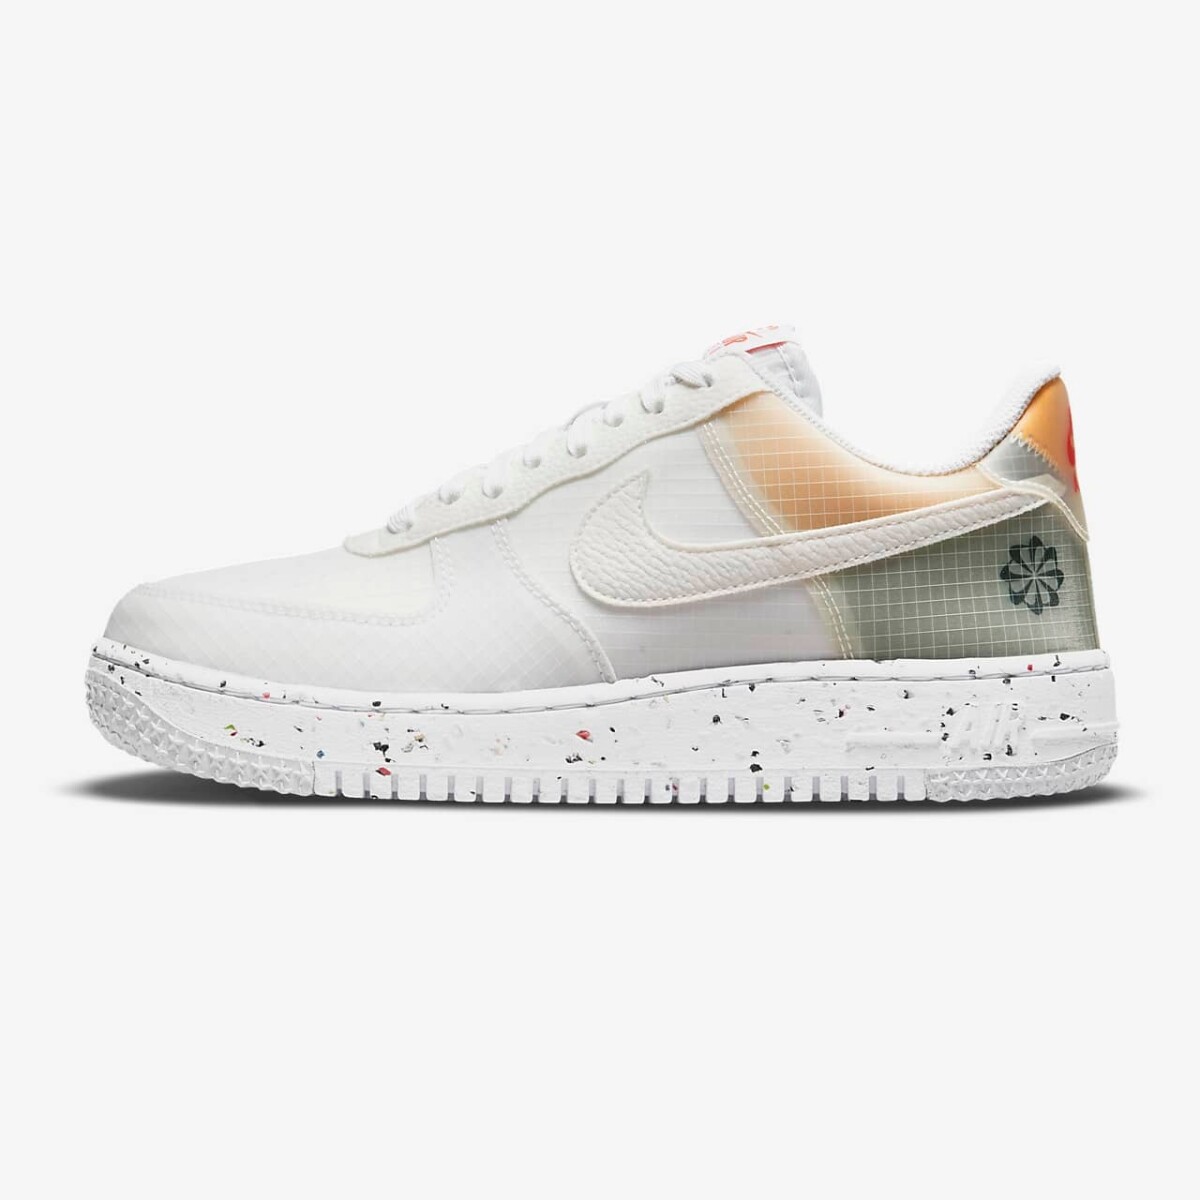 Champion Nike Moda Hombre Air Force 1 Crater - Color Único 